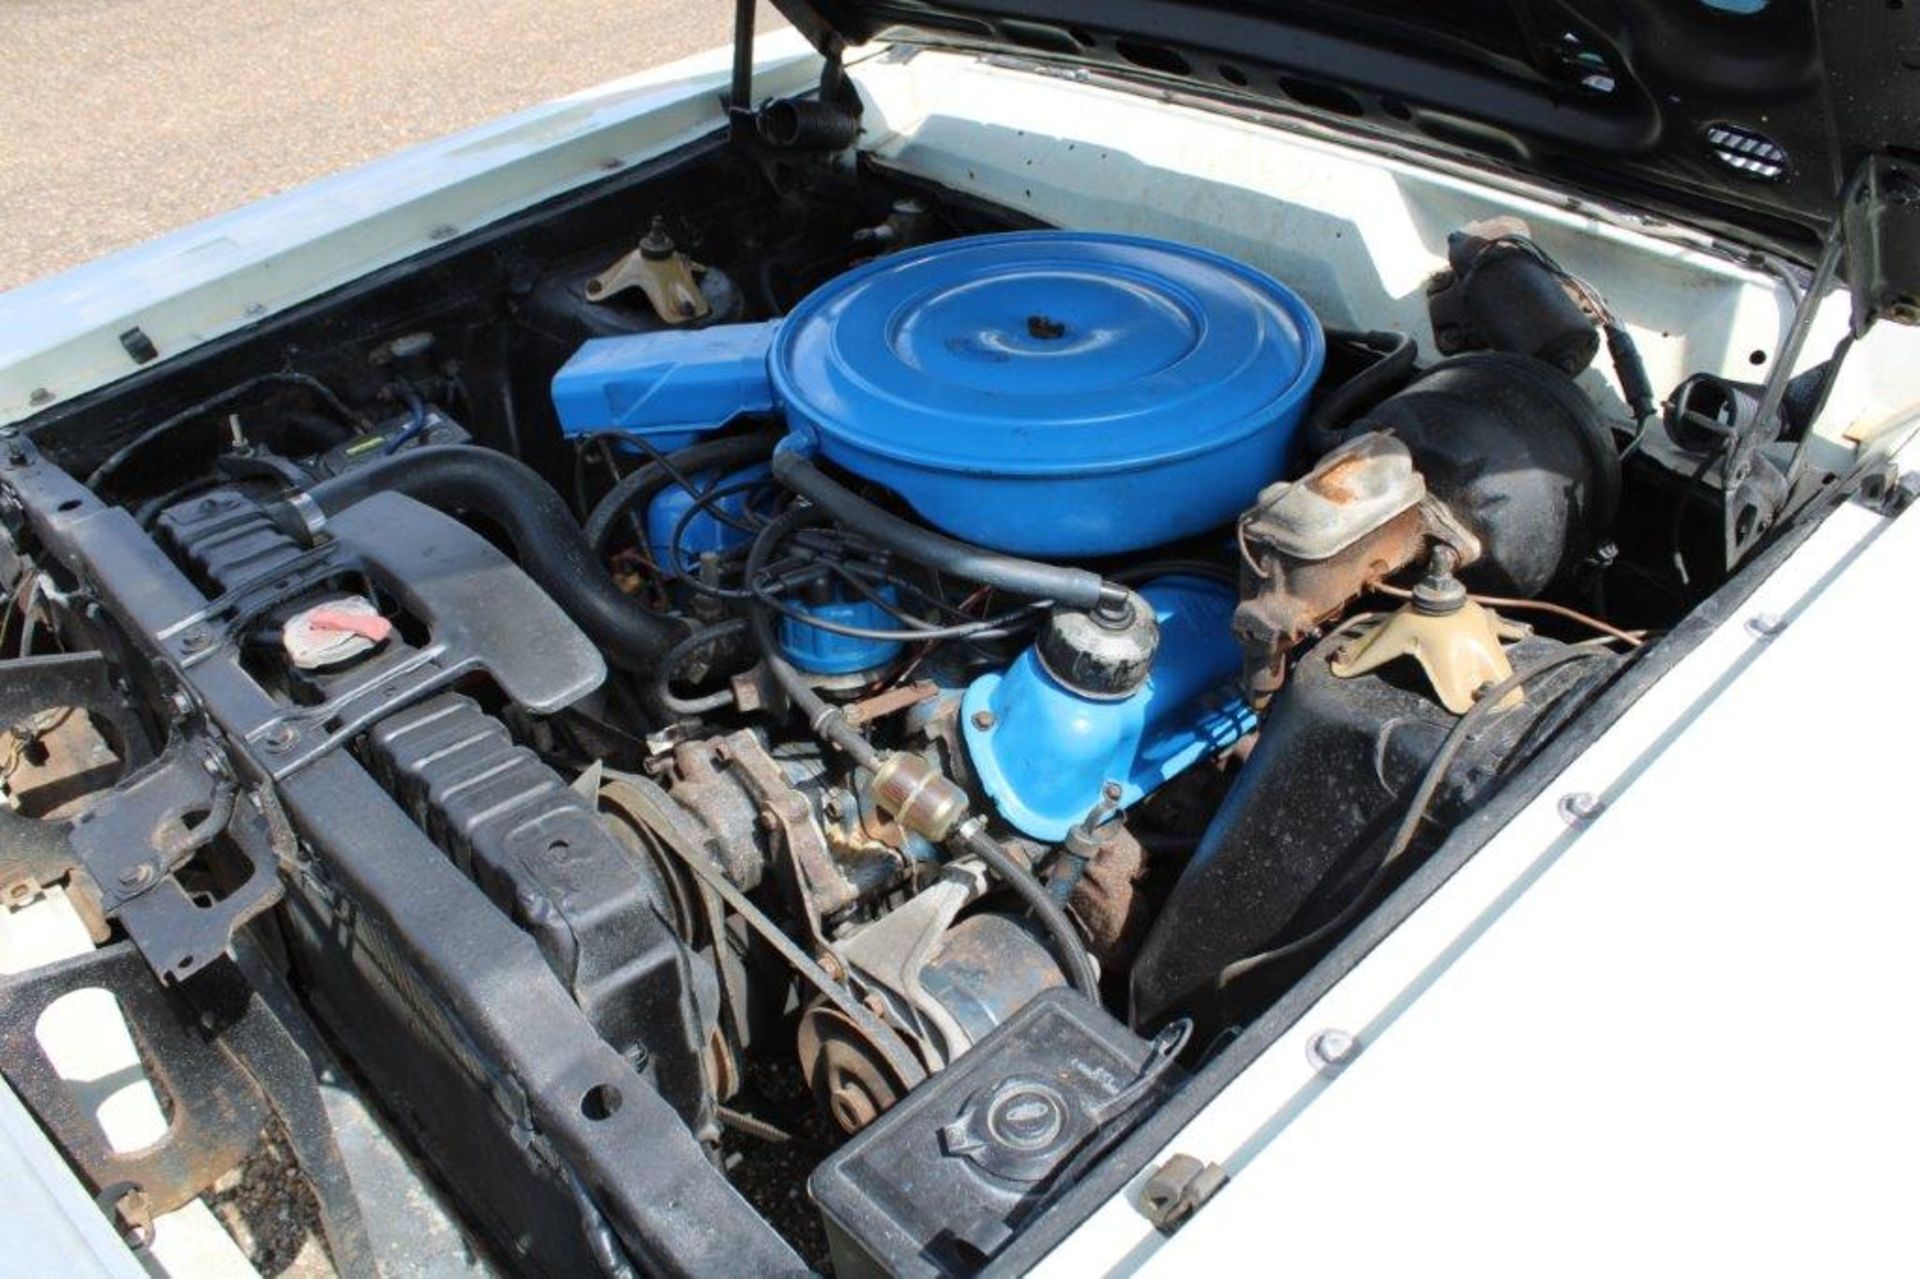 1969 Ford Ranchero 5.8 V8 Auto LHD - Image 17 of 25